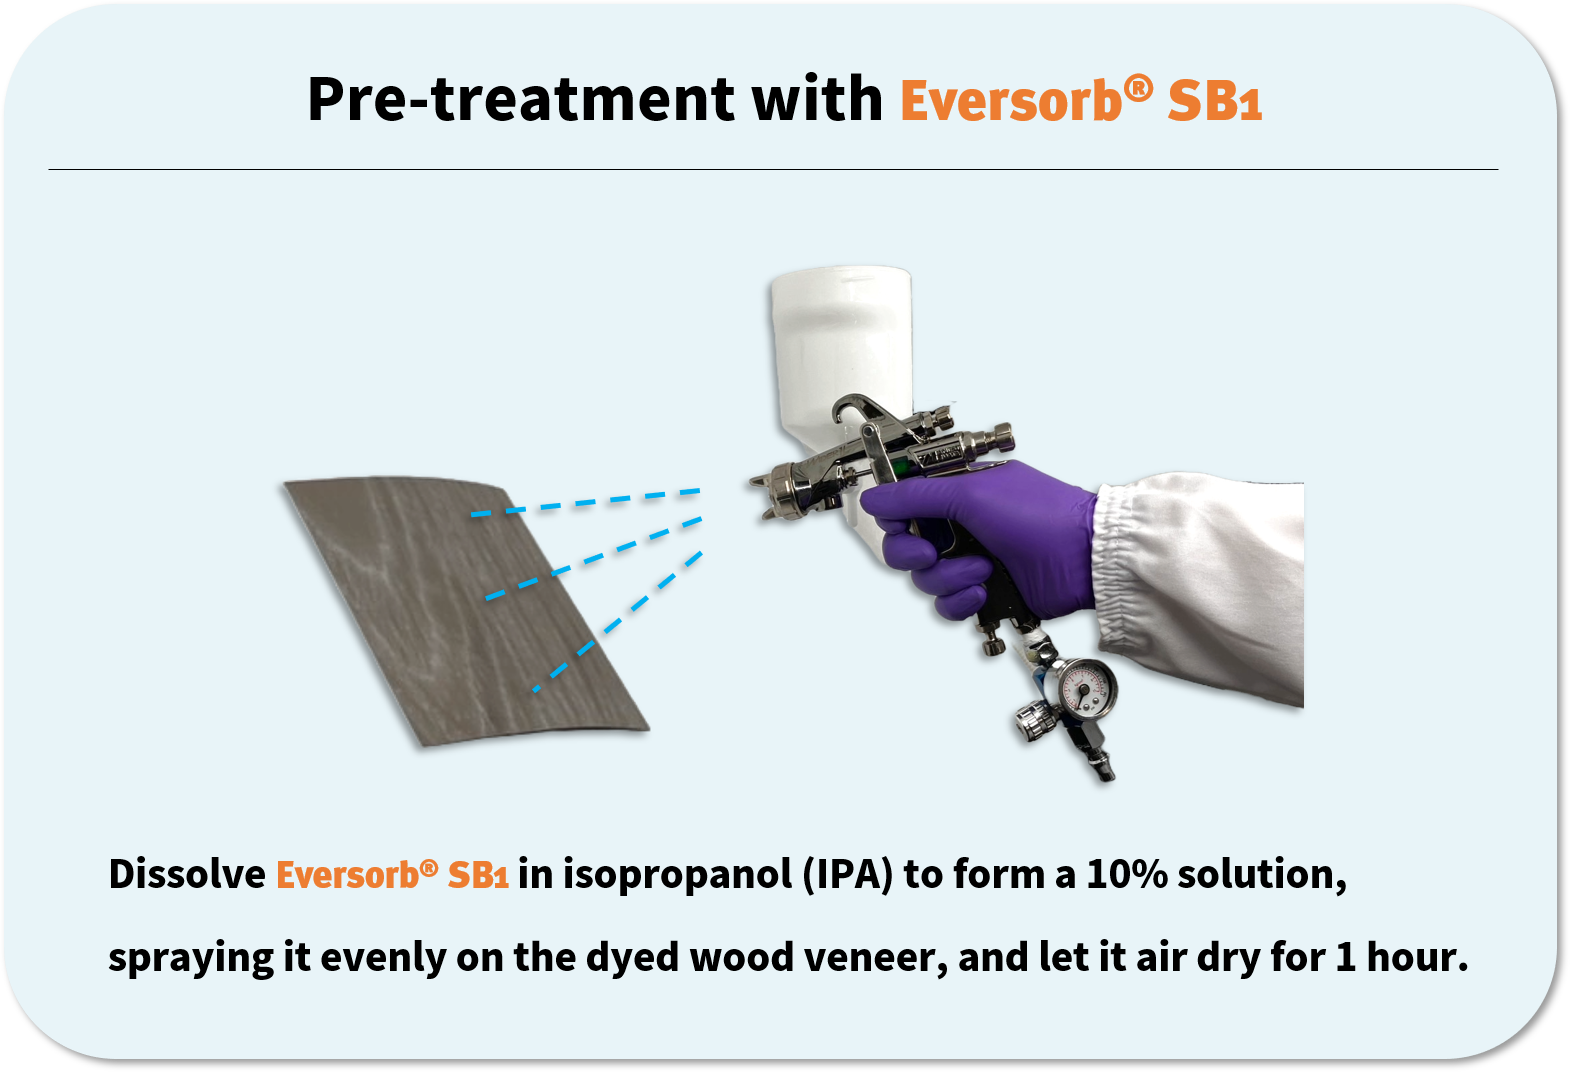 Eversorb Enable the Automotive Industry to Move Toward a Sustainable Future